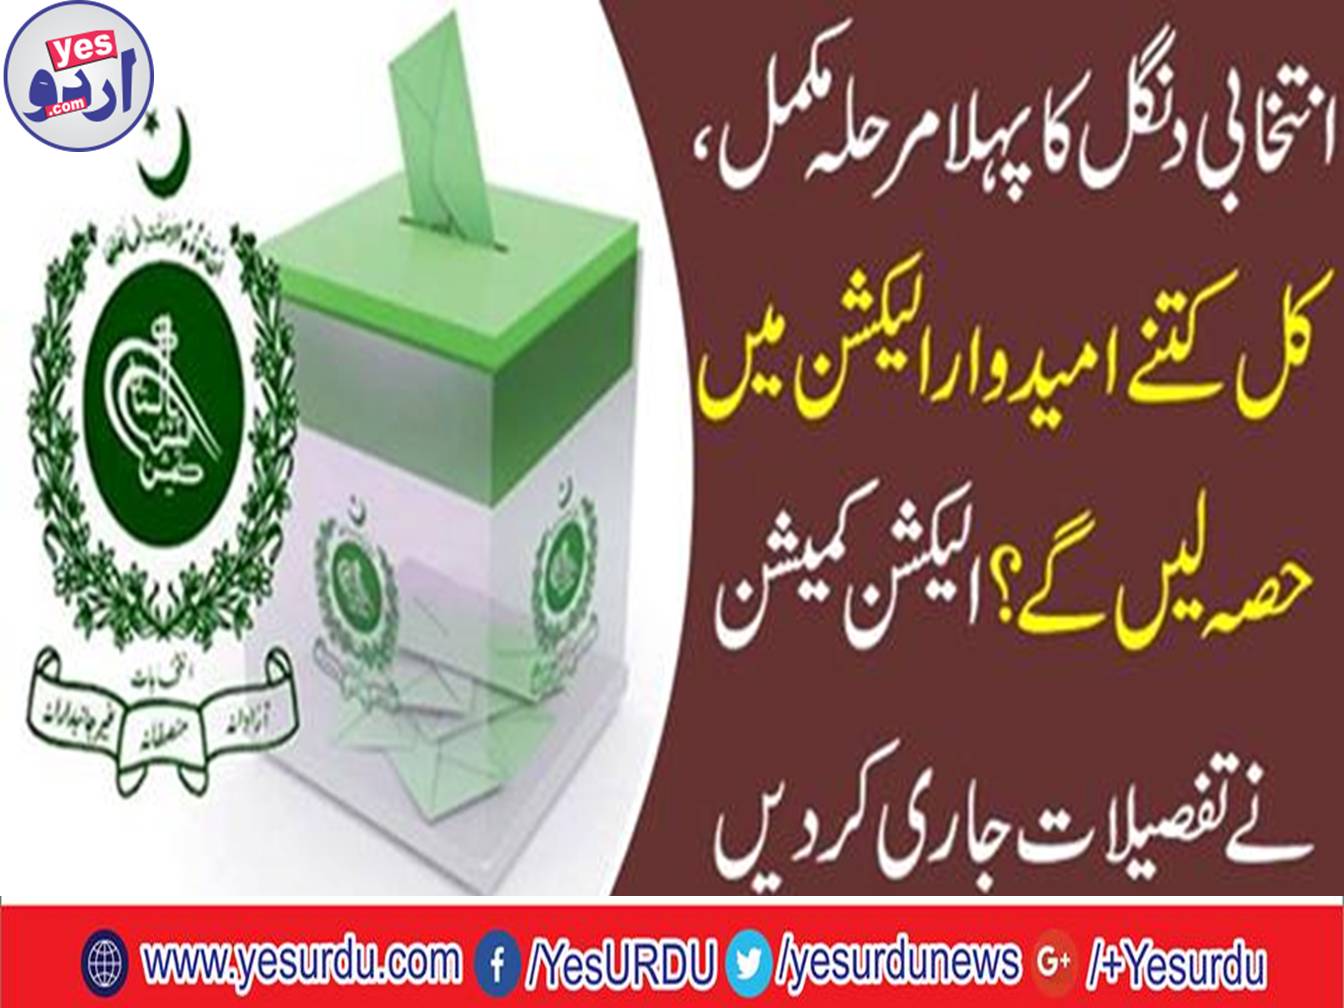 The Election Commission has issued details